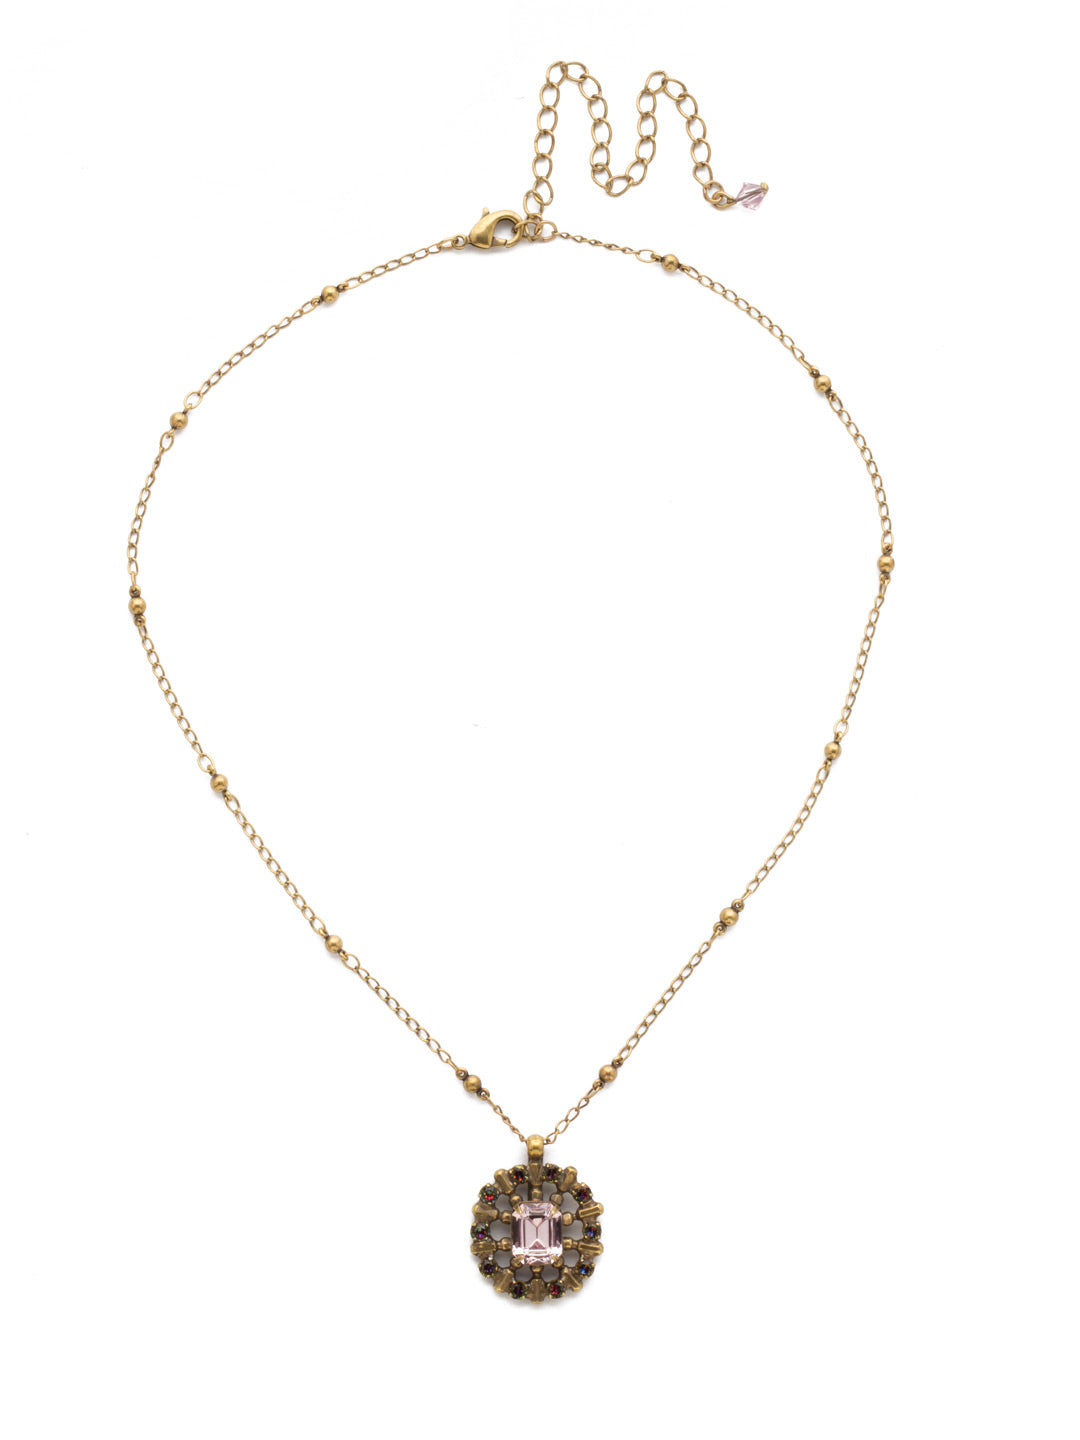 Abelia Necklace - NDW60AGROP - A fun twist on a simple pendant, an octagon stone takes center stage while metal spokes lead to an outer circle encrusted with small round crystals.